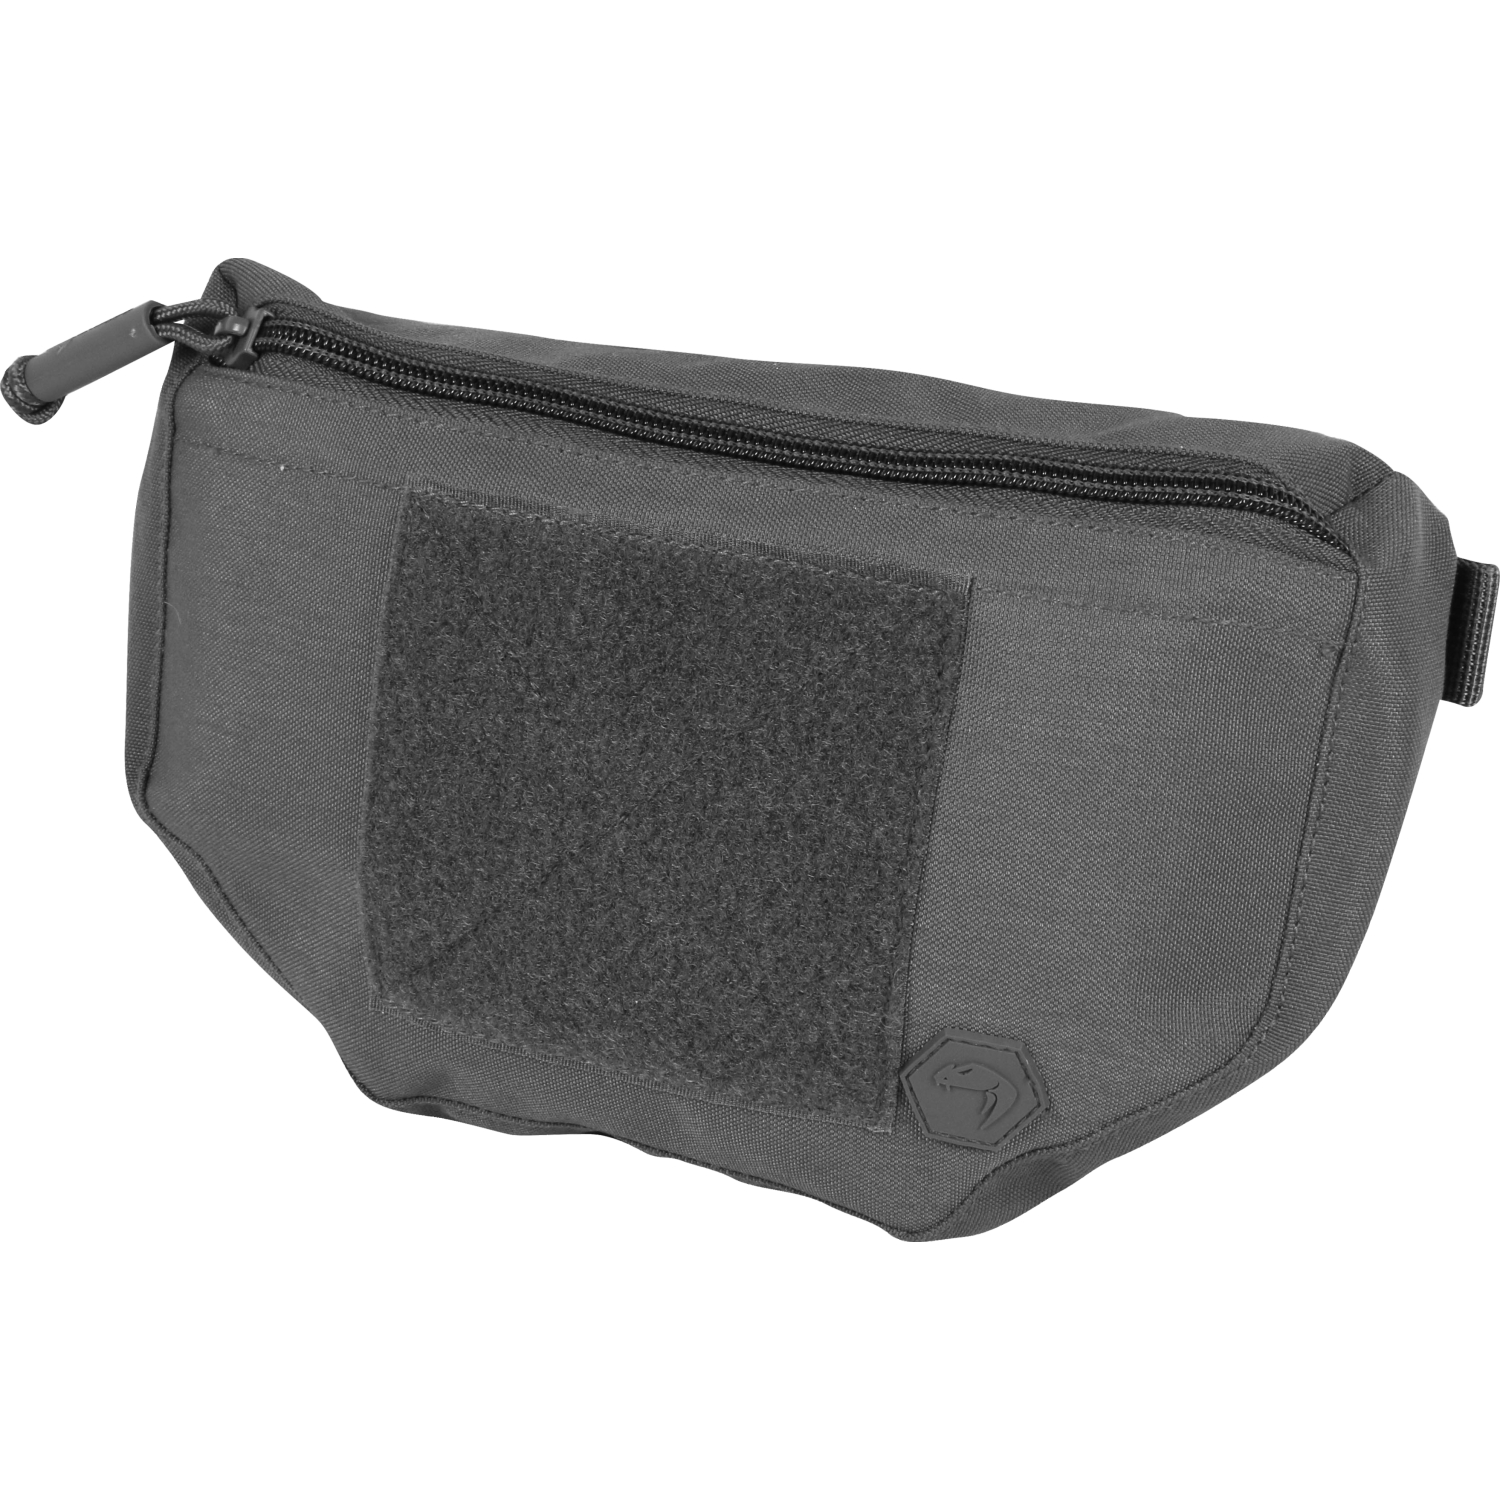 VIPER SCROTE TACTICAL SPORTS VEST POUCH UTILITY HOLDER ARMY WEBBING AIRSOFT 